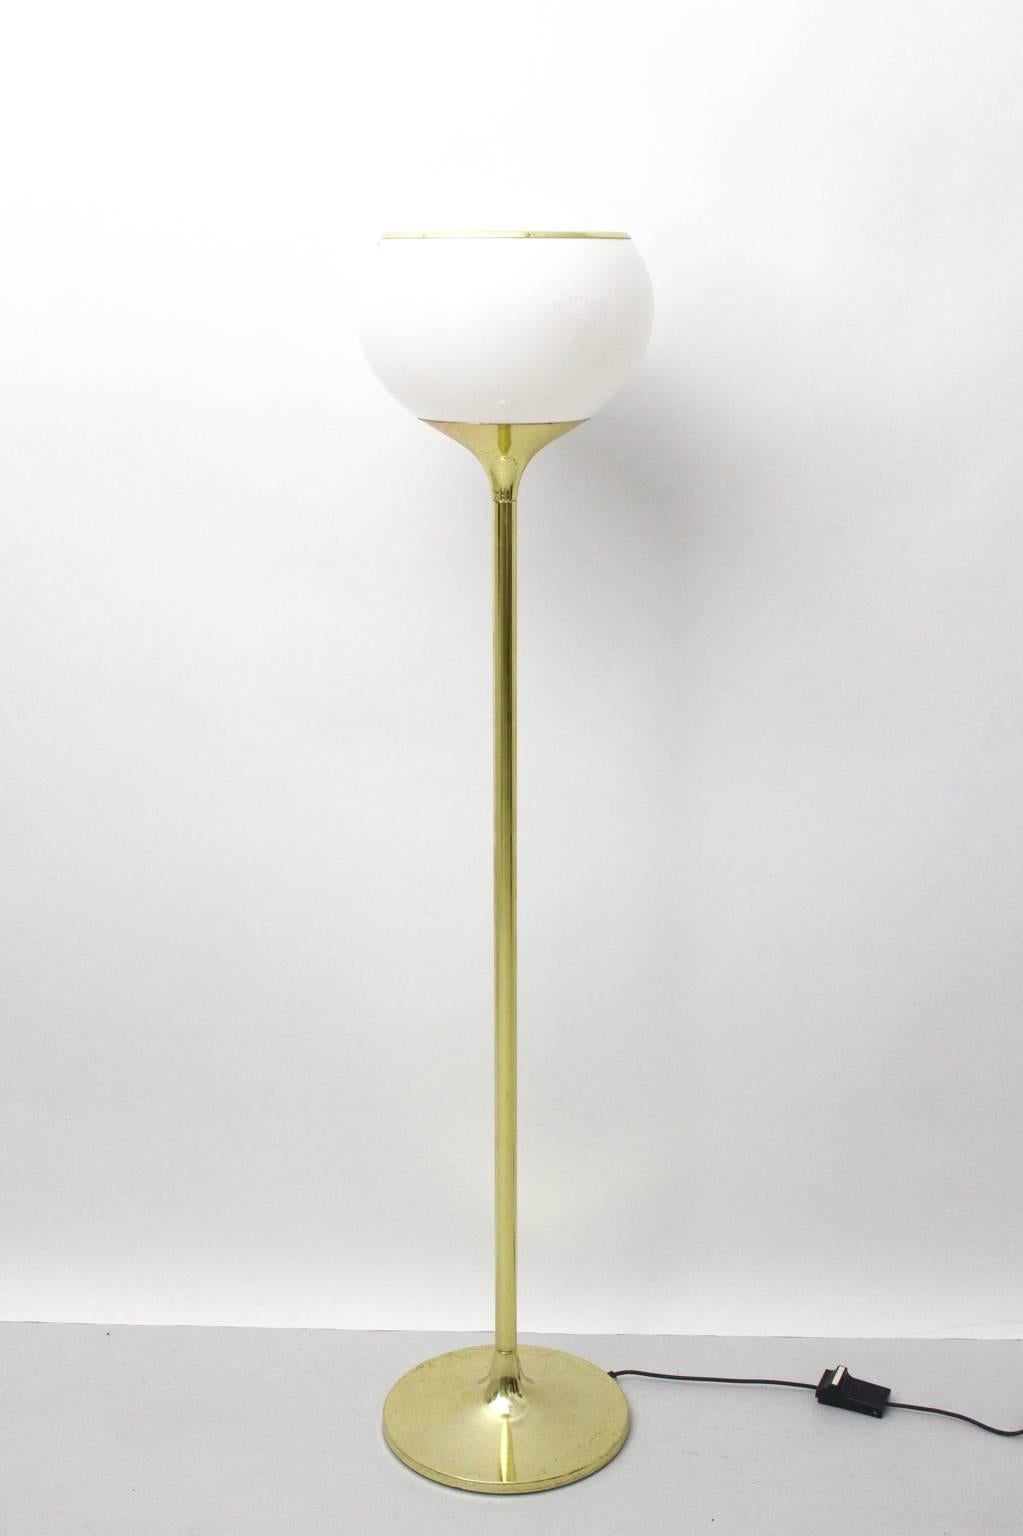 Space age vintage floor lamp was designed by Harvey Guzzini and produced by Meblo, Italy, circa 1970.
The floor lamp consists of brass and perspex and attracts with its simple design.
Labeled with the company name Meblo.
One socket for one bulb E